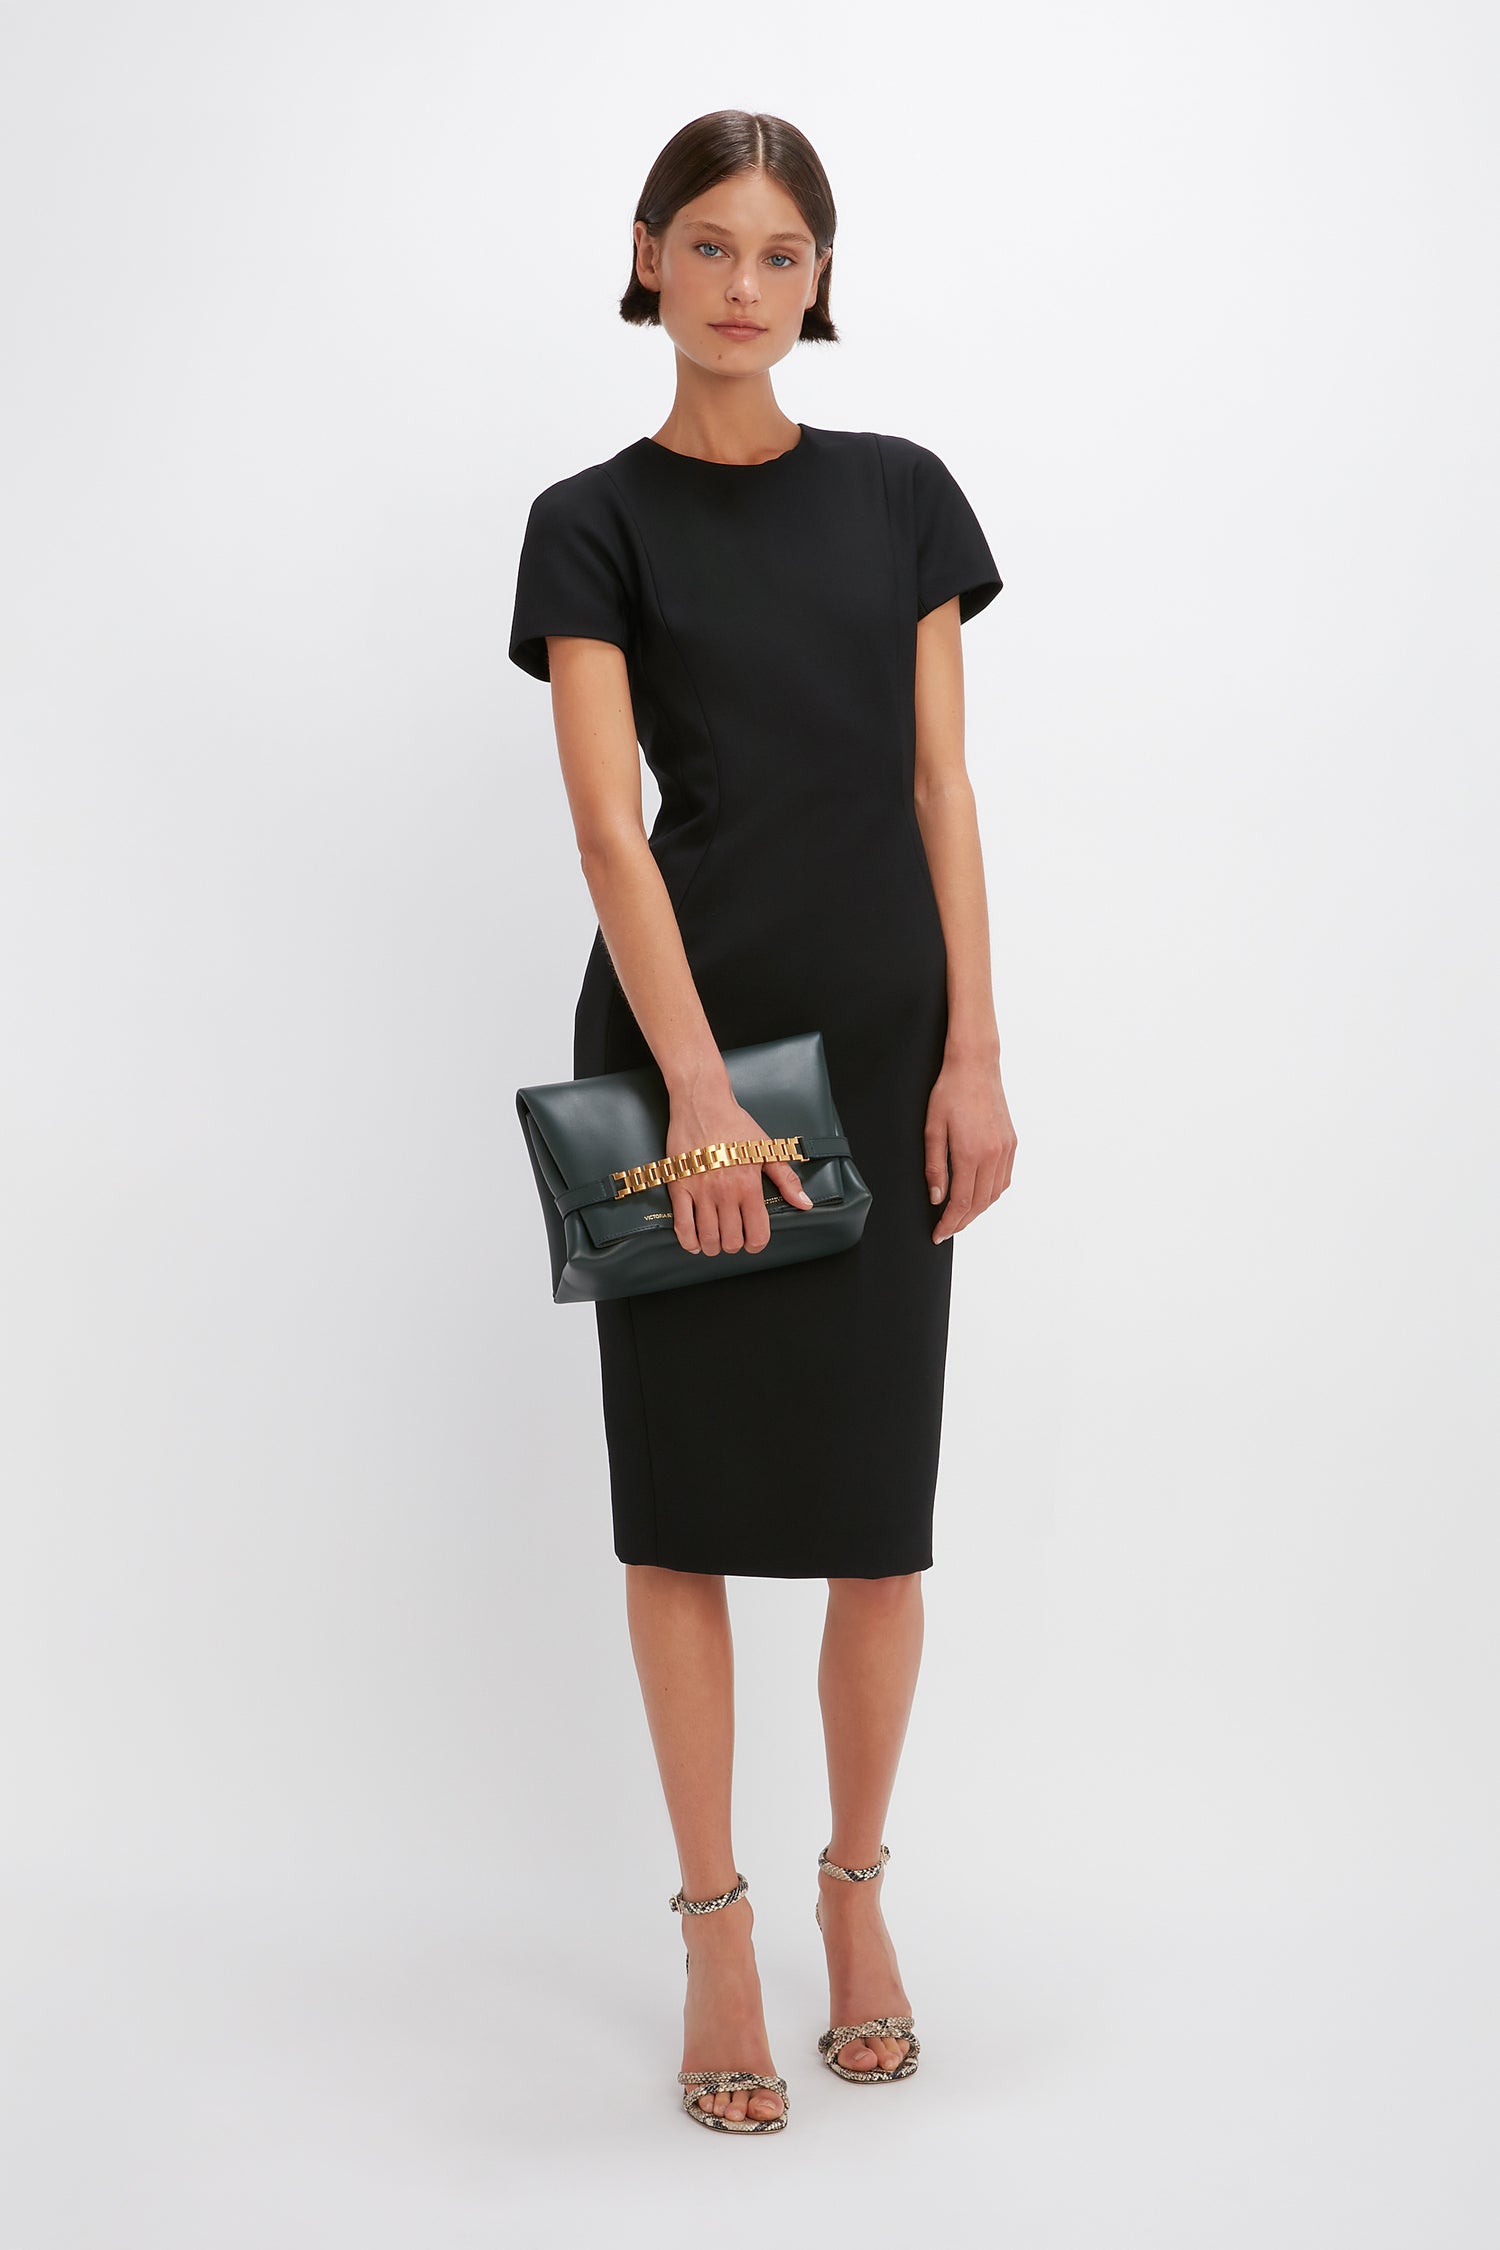 Person standing against a plain background, wearing the Victoria Beckham Spiral Fitted T-Shirt Dress In Black and holding a black clutch with a gold chain. They have short hair and are wearing strappy heels, embodying a sleek Victoria Beckham style.